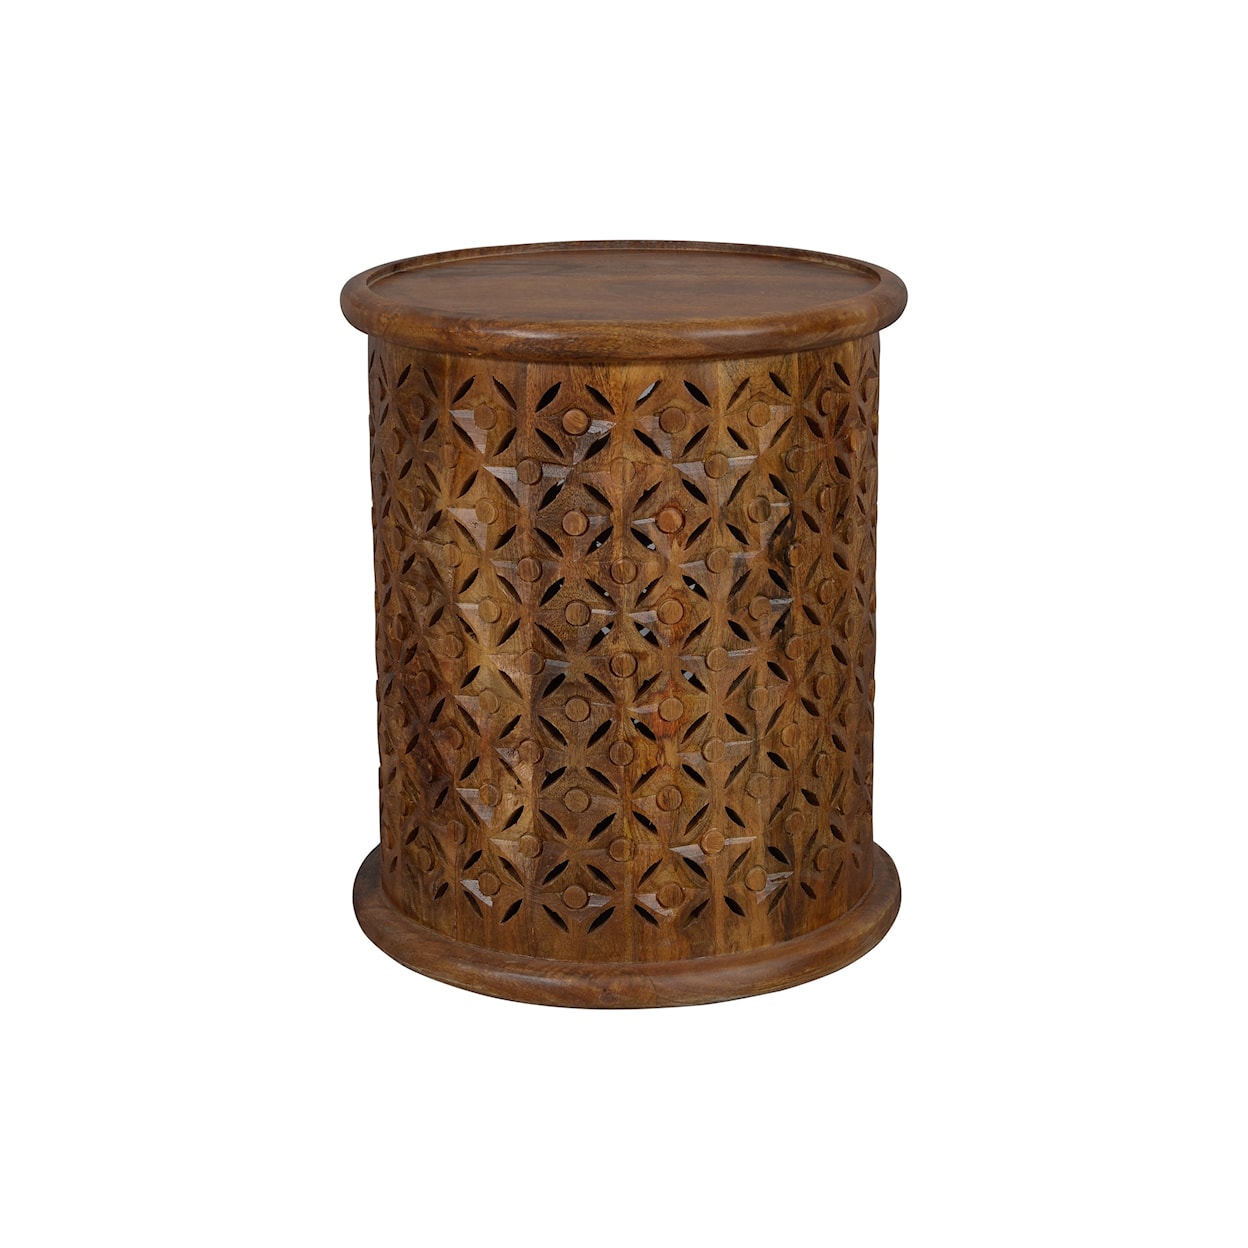 Jofran Global Archive Decker Small Drum Table